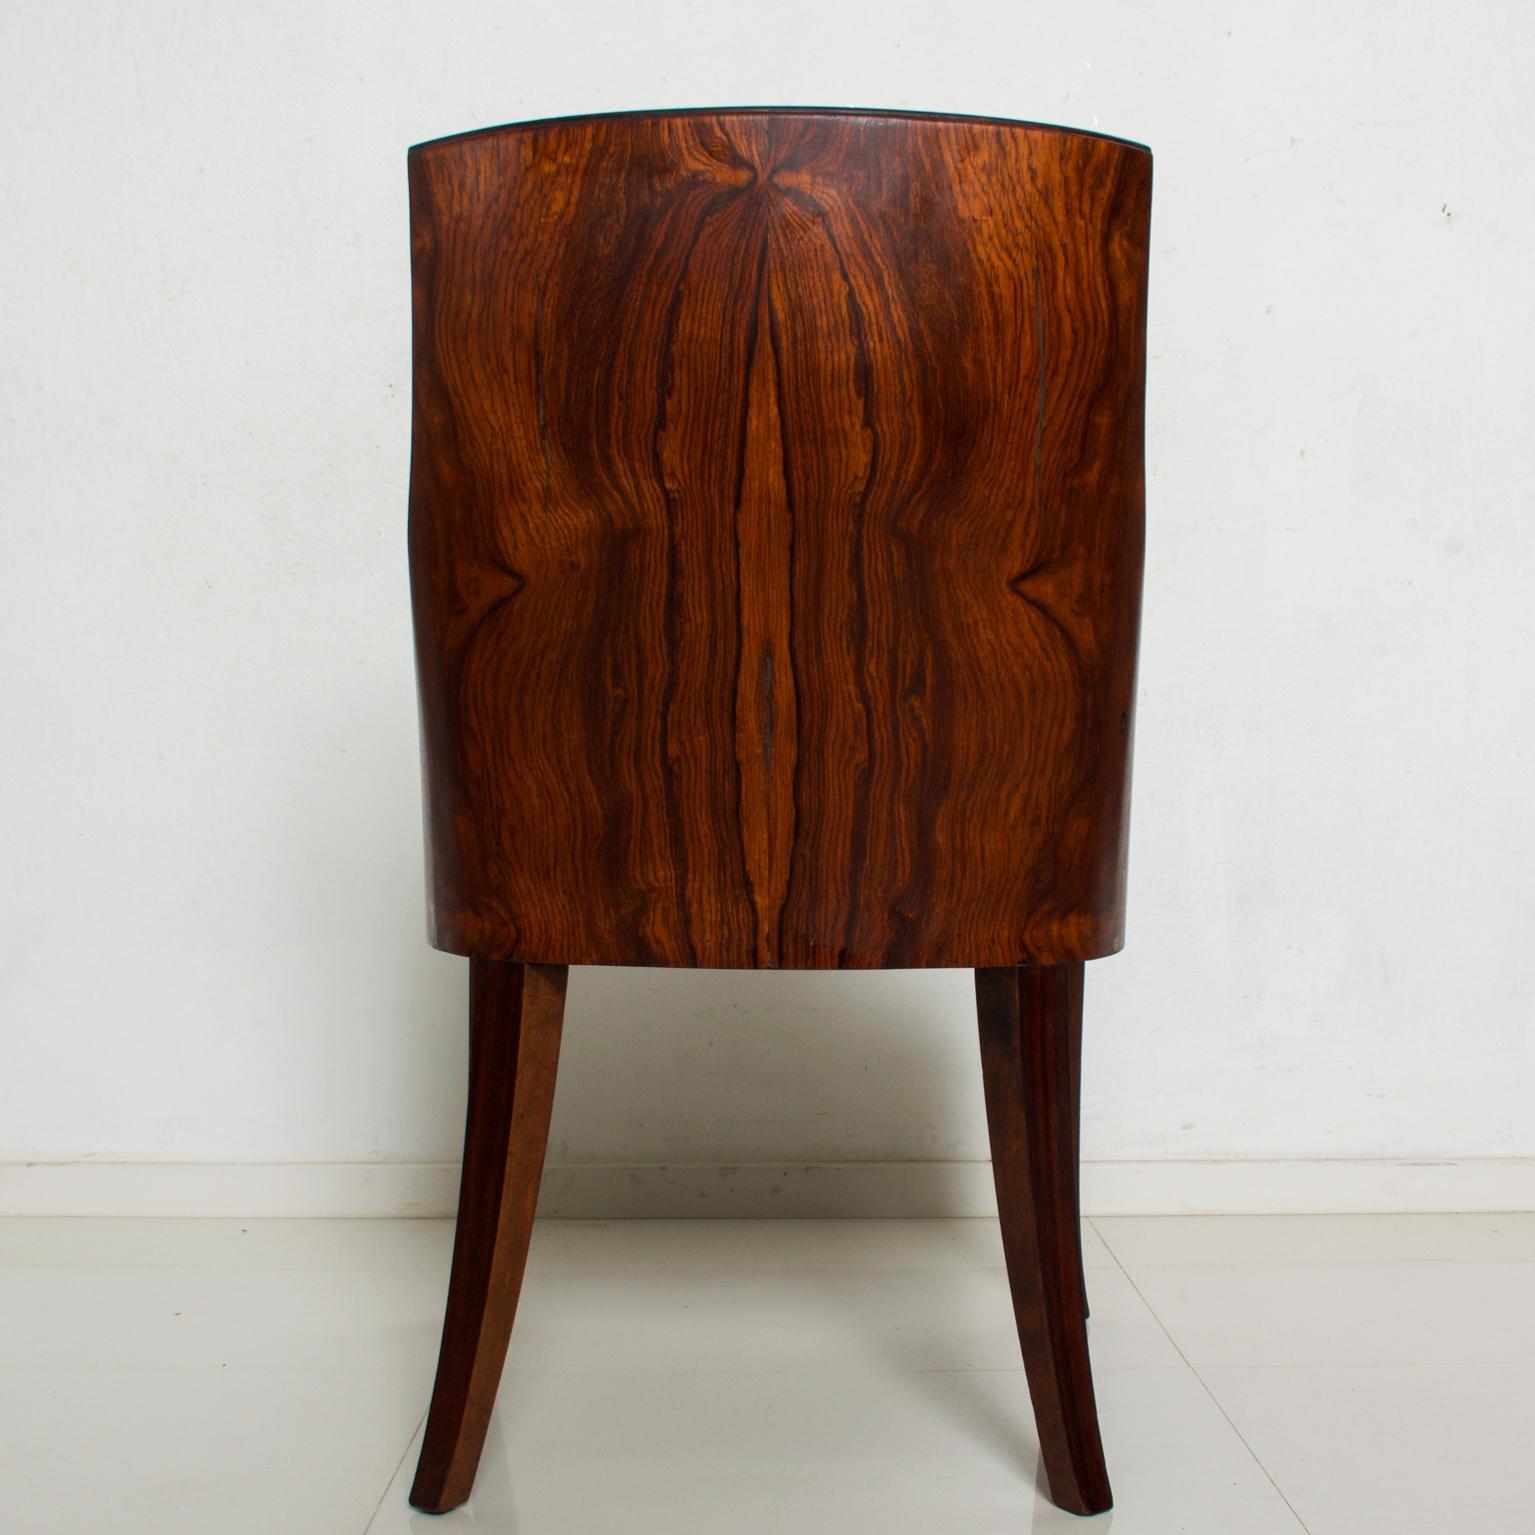 Mid-20th Century 1940s French Art Deco Sculptural Rosewood Side Chairs Style of Gilbert Rohde